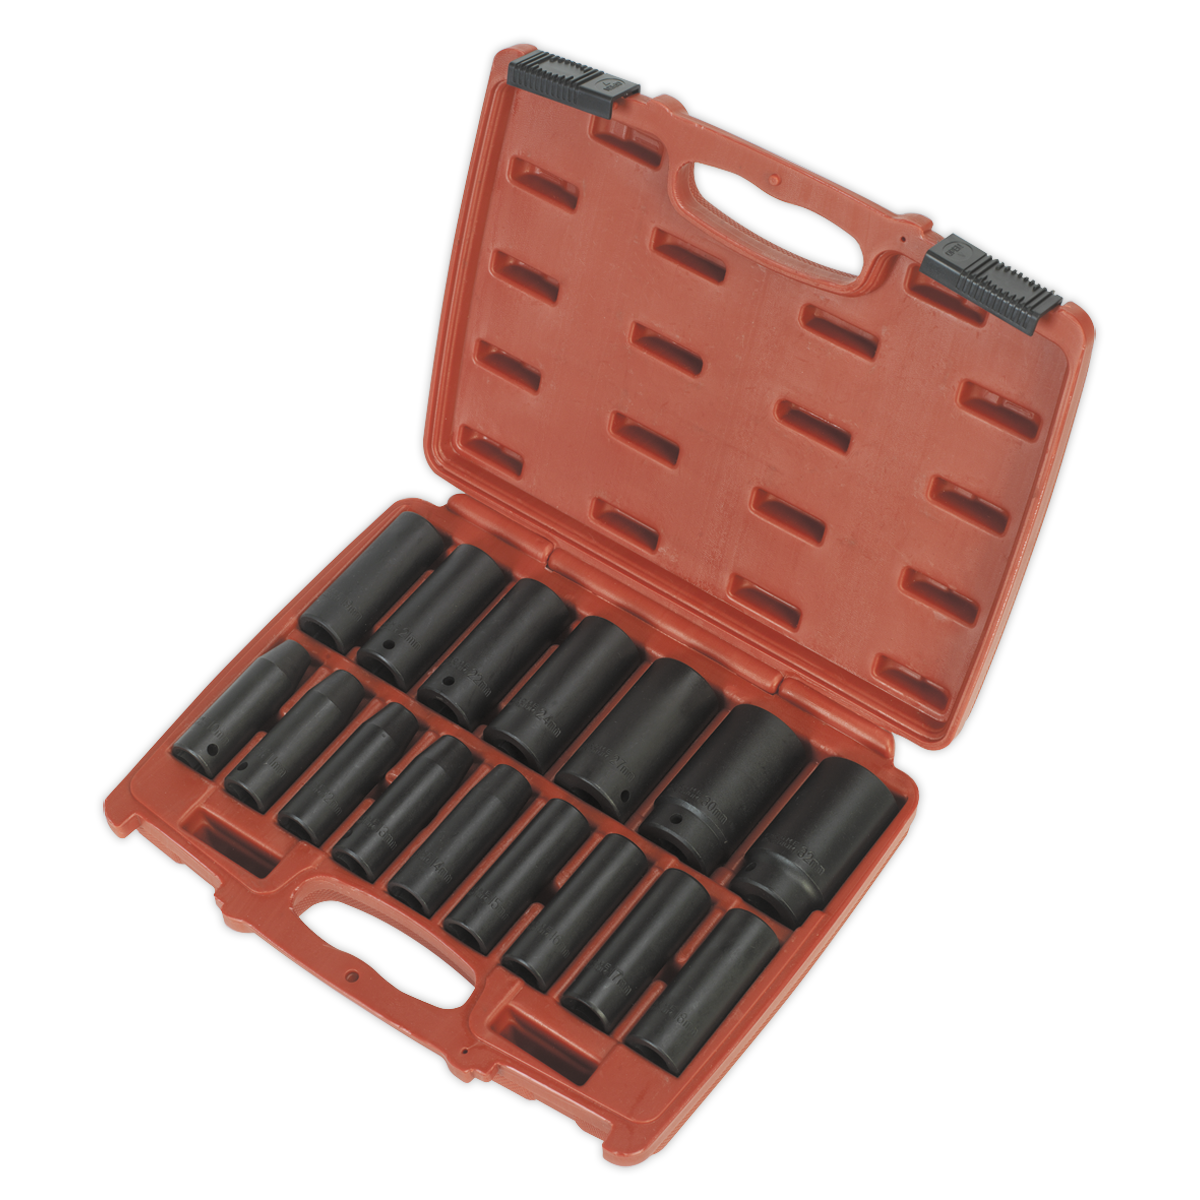 Impact Socket Set 16pc 1/2"Sq Drive Deep Metric | Manufactured from Chrome Vanadium steel, hardened, tempered and with a phosphate finish for added corrosion resistance. | toolforce.ie